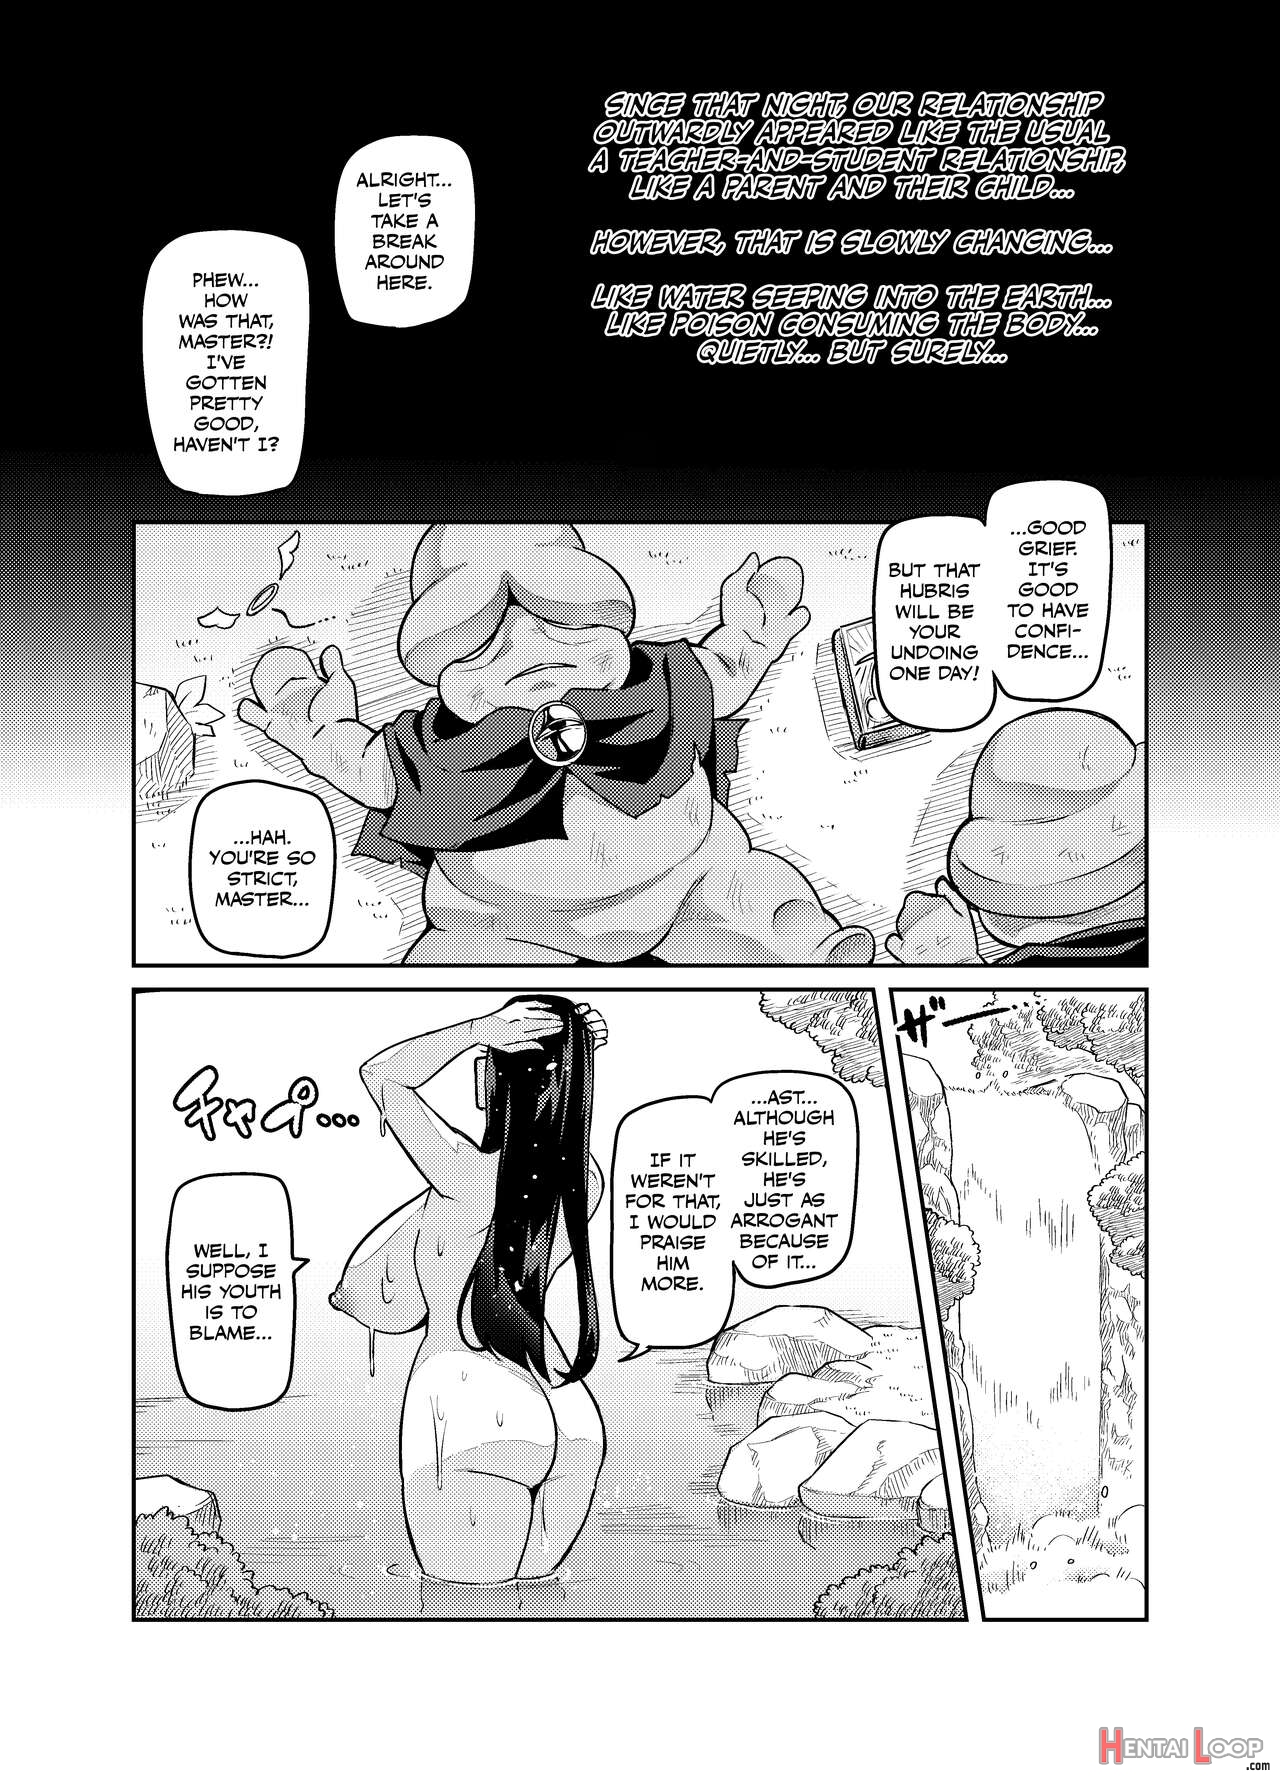 High Wizard Elena ~the Witch Who Fell In Love With The Child Entrusted To Her By Her Past Sweetheart~ Chapter 1-13, Ex page 13